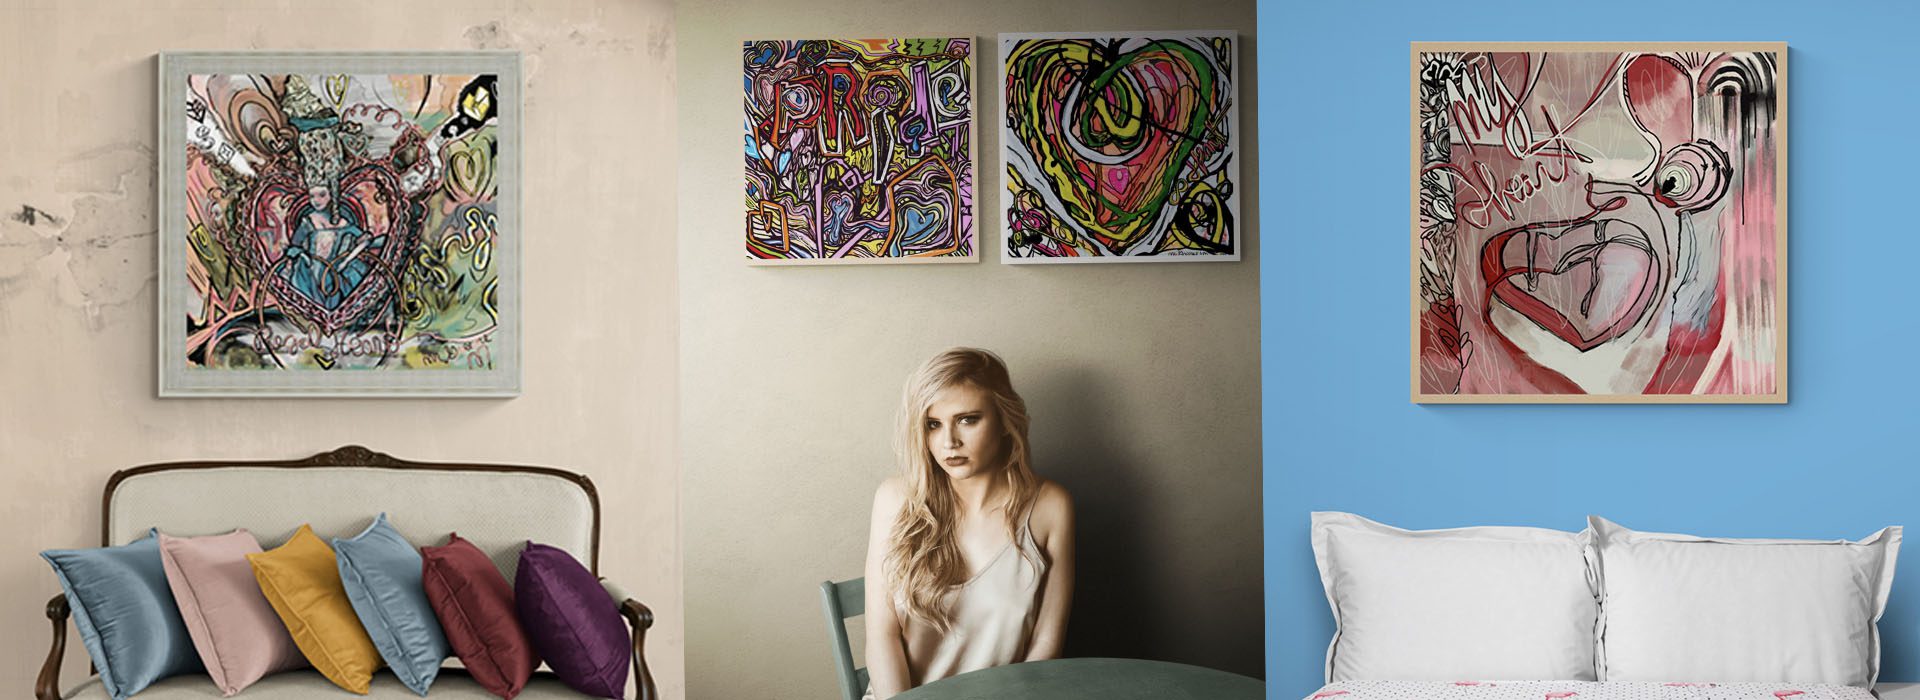 A woman sitting in front of two paintings.